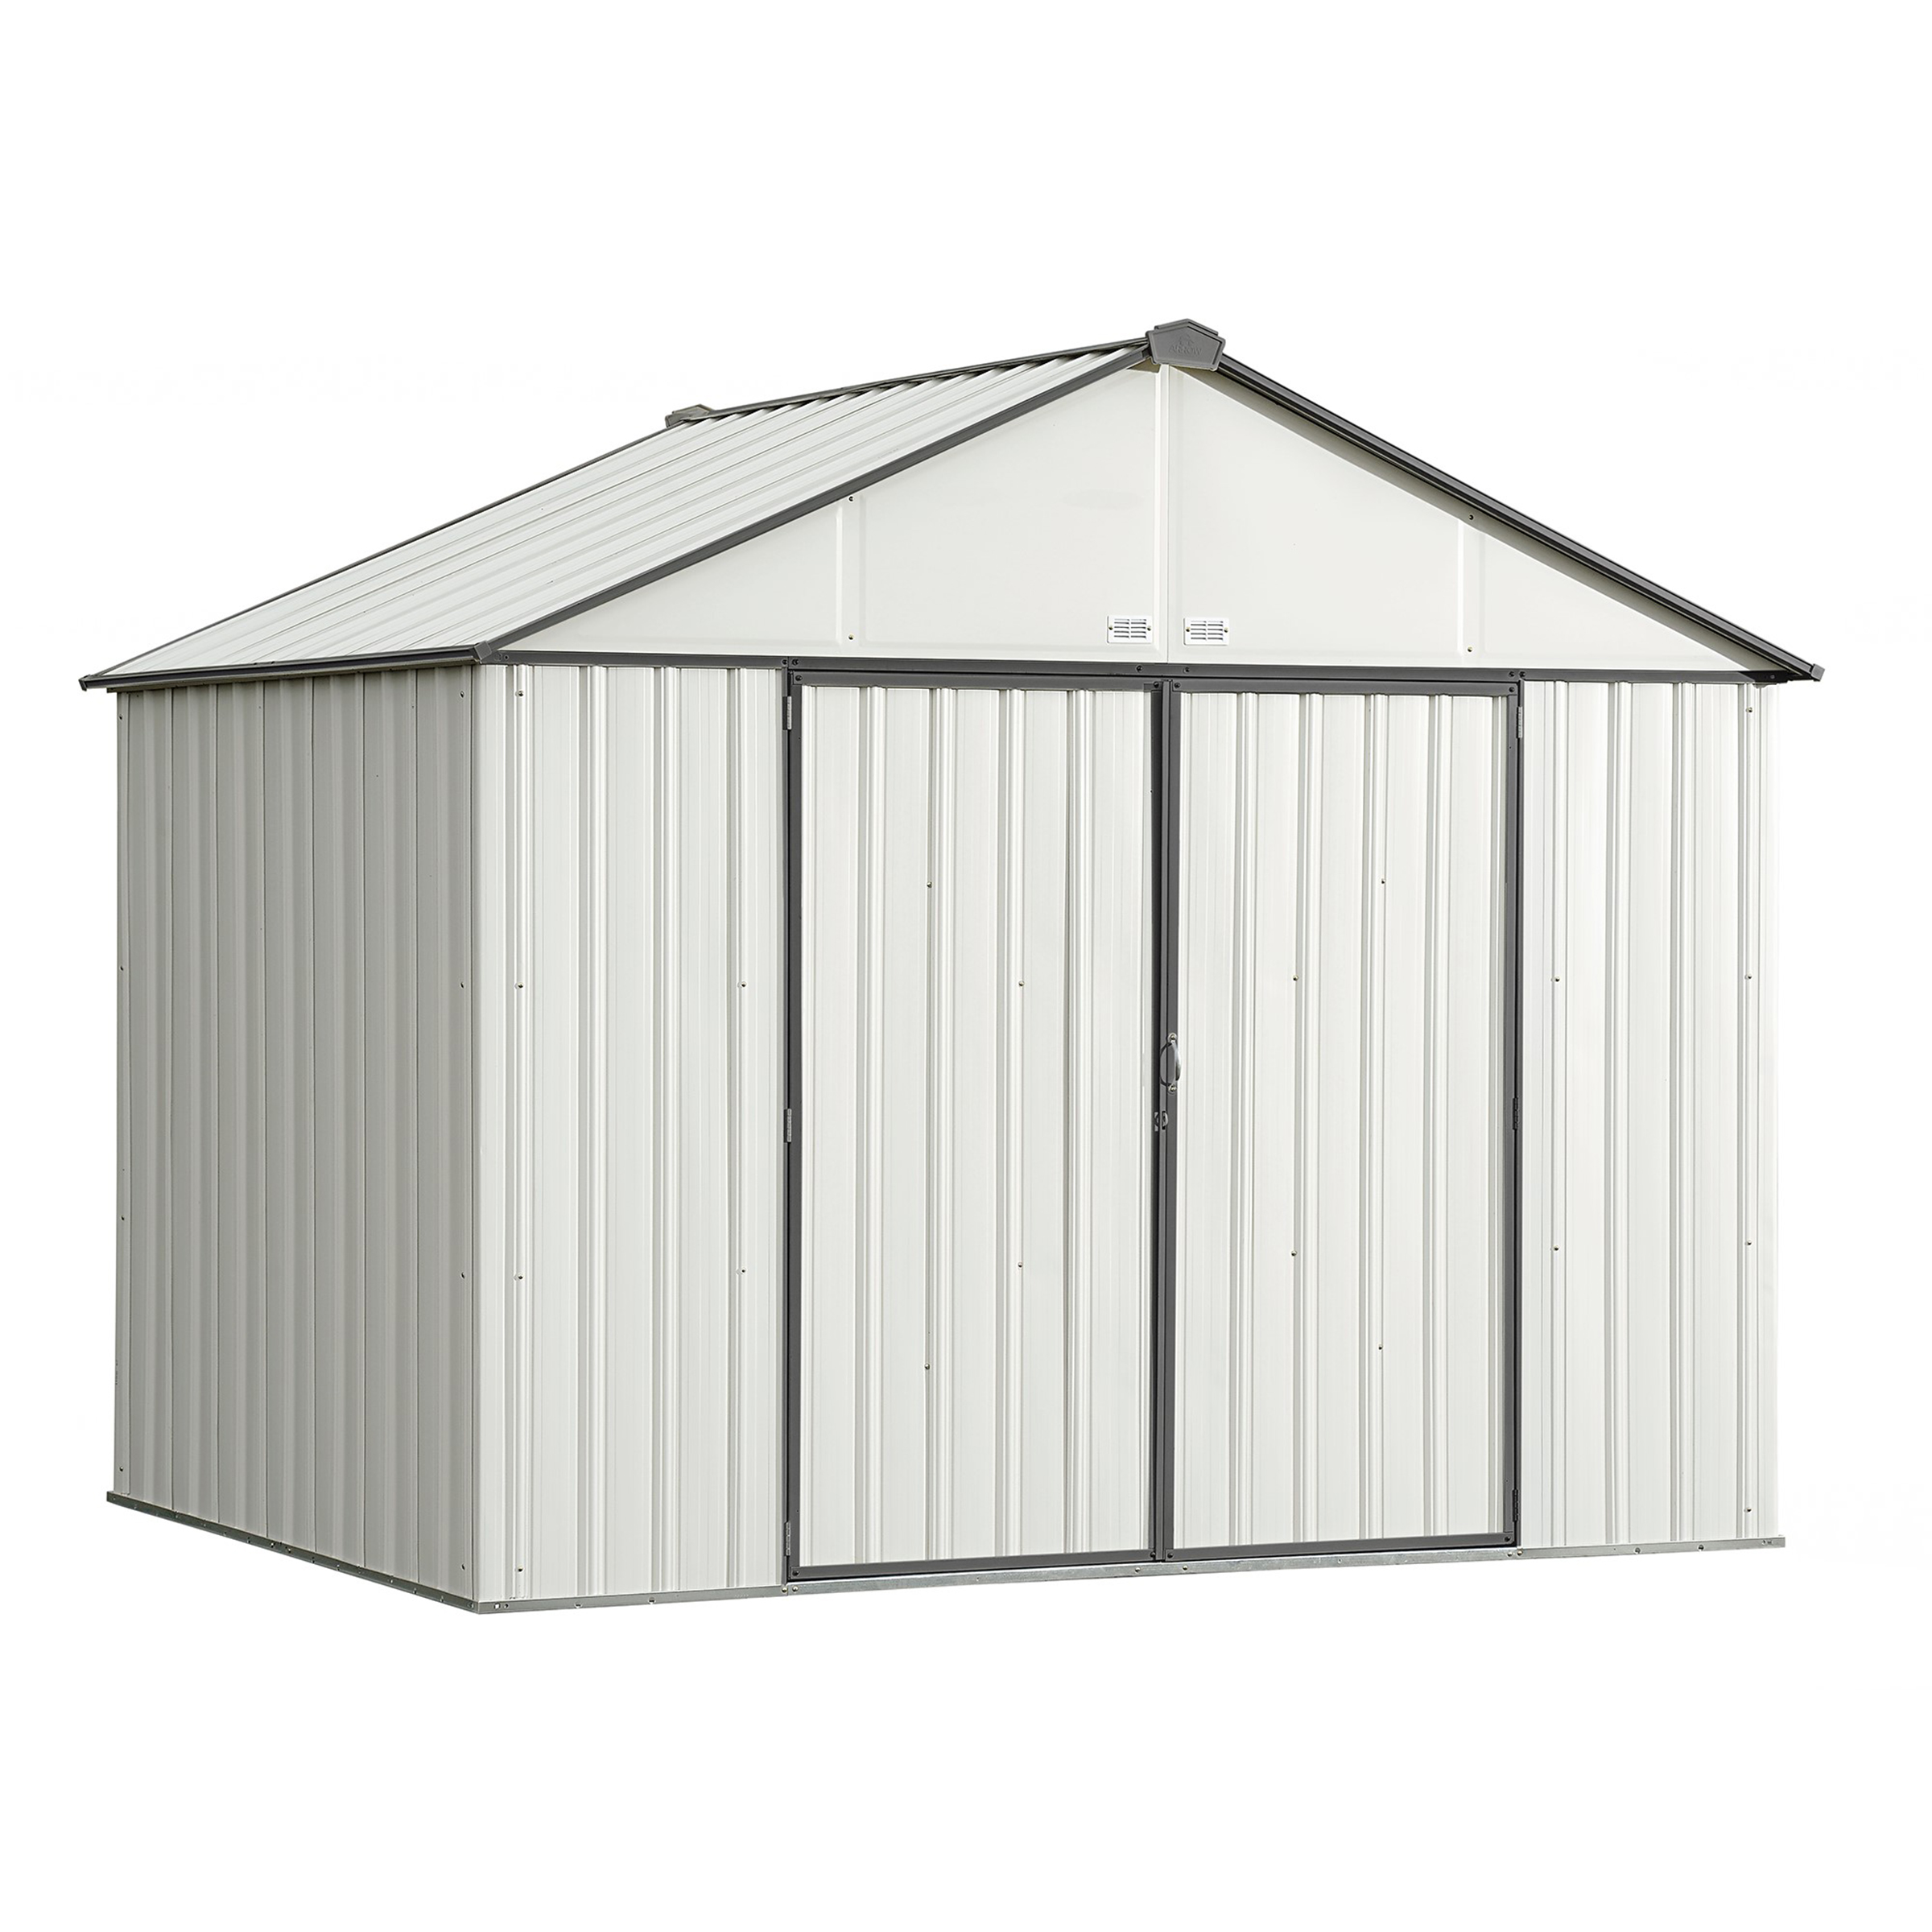 Ezee Shed , 10x8, Extra High Gable, 72 In Walls, Cream & Charcoal